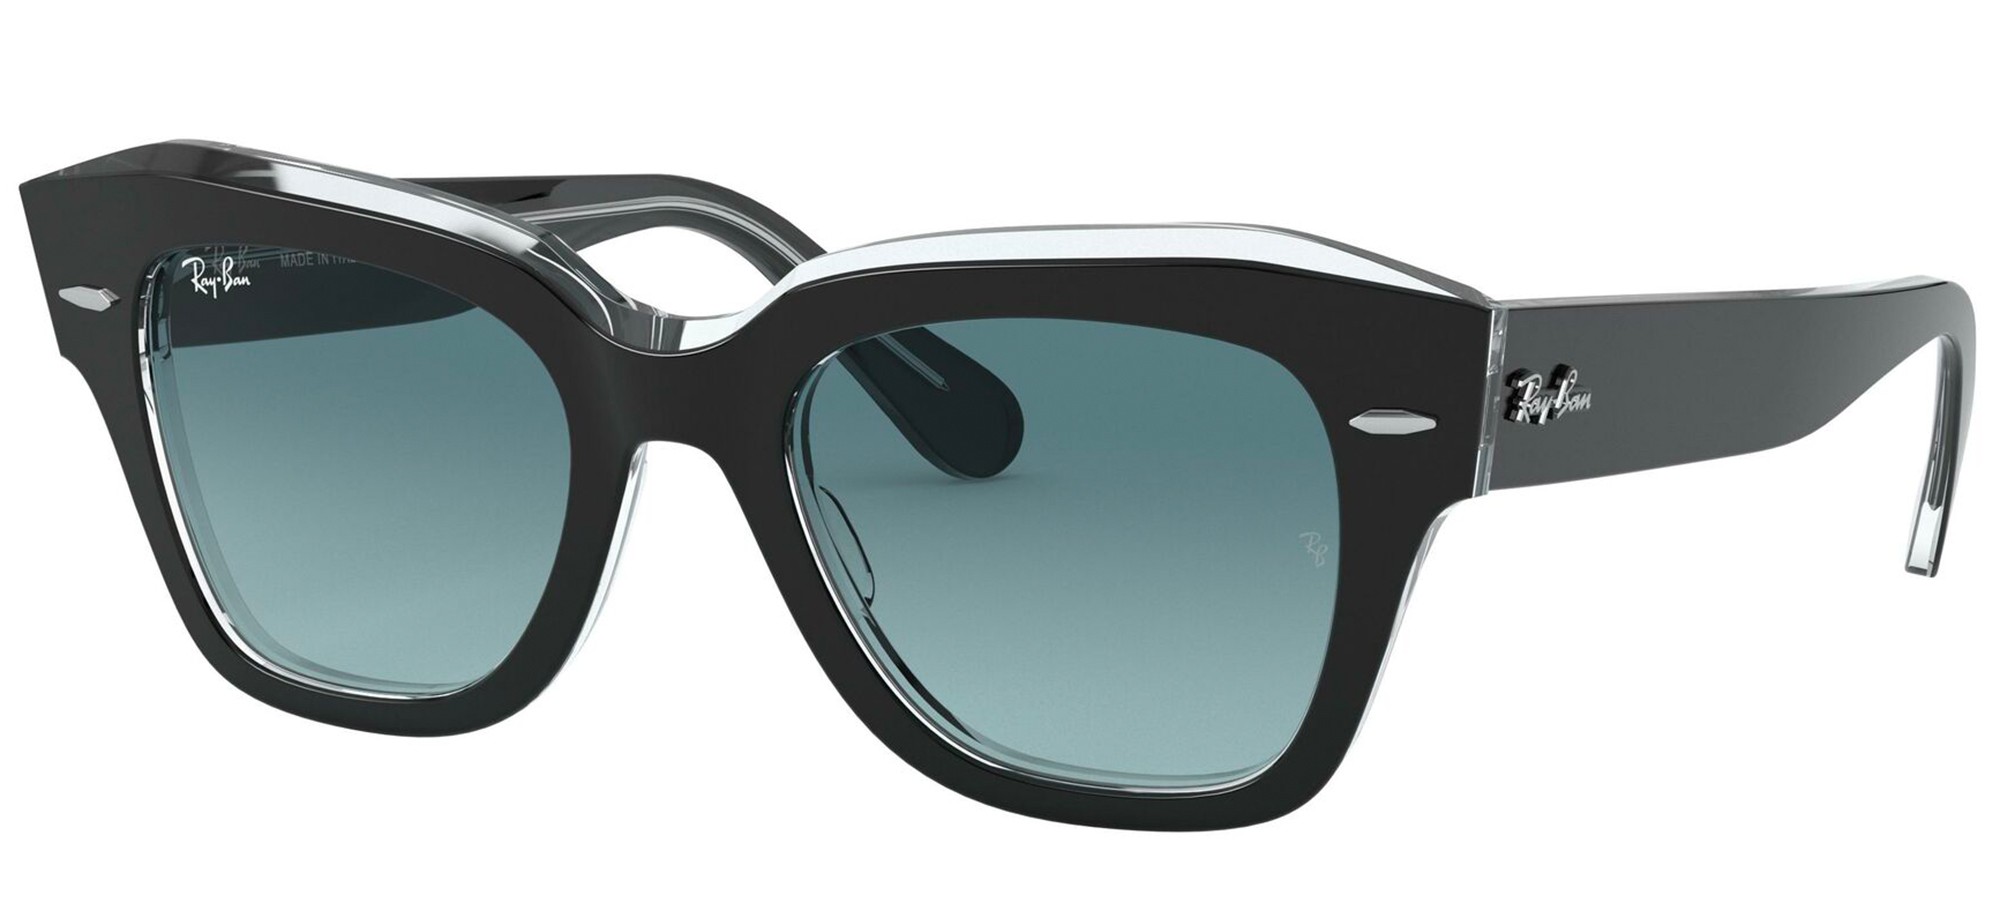 Ray Ban State Street 2186 12943M - Oculos de Sol